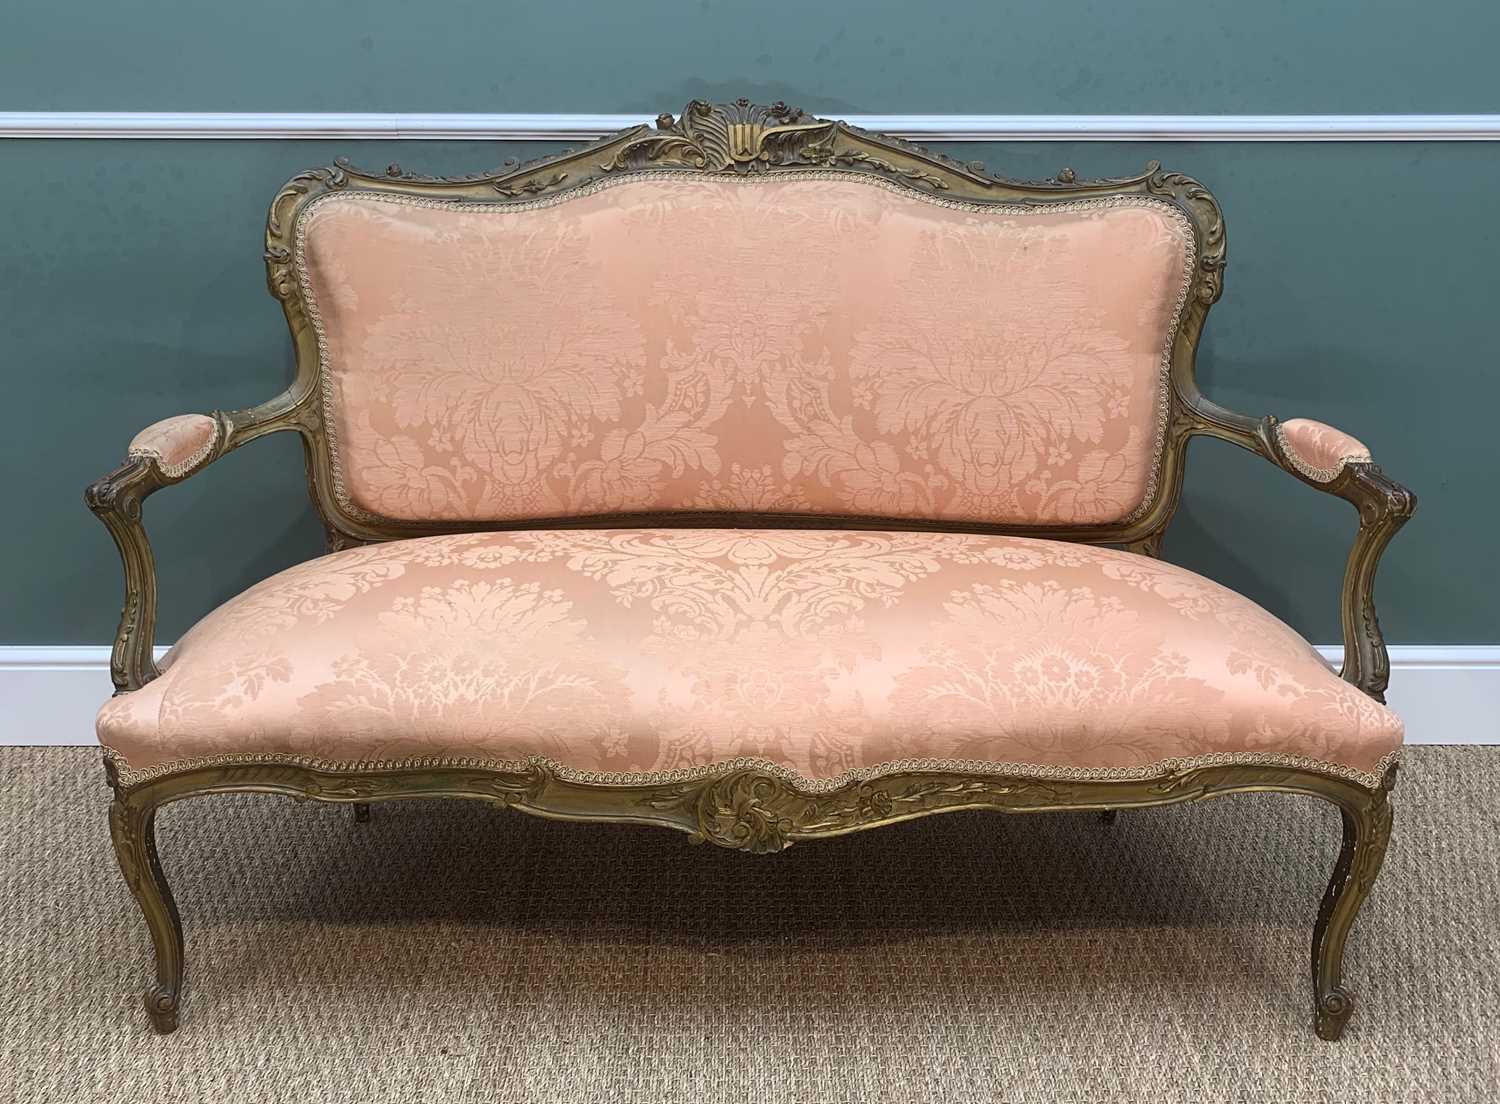 LOUIS XV-STYLE GILTWOOD SALON SUITE, comprising canape and pair of fauteuils, apricot damask - Image 3 of 7